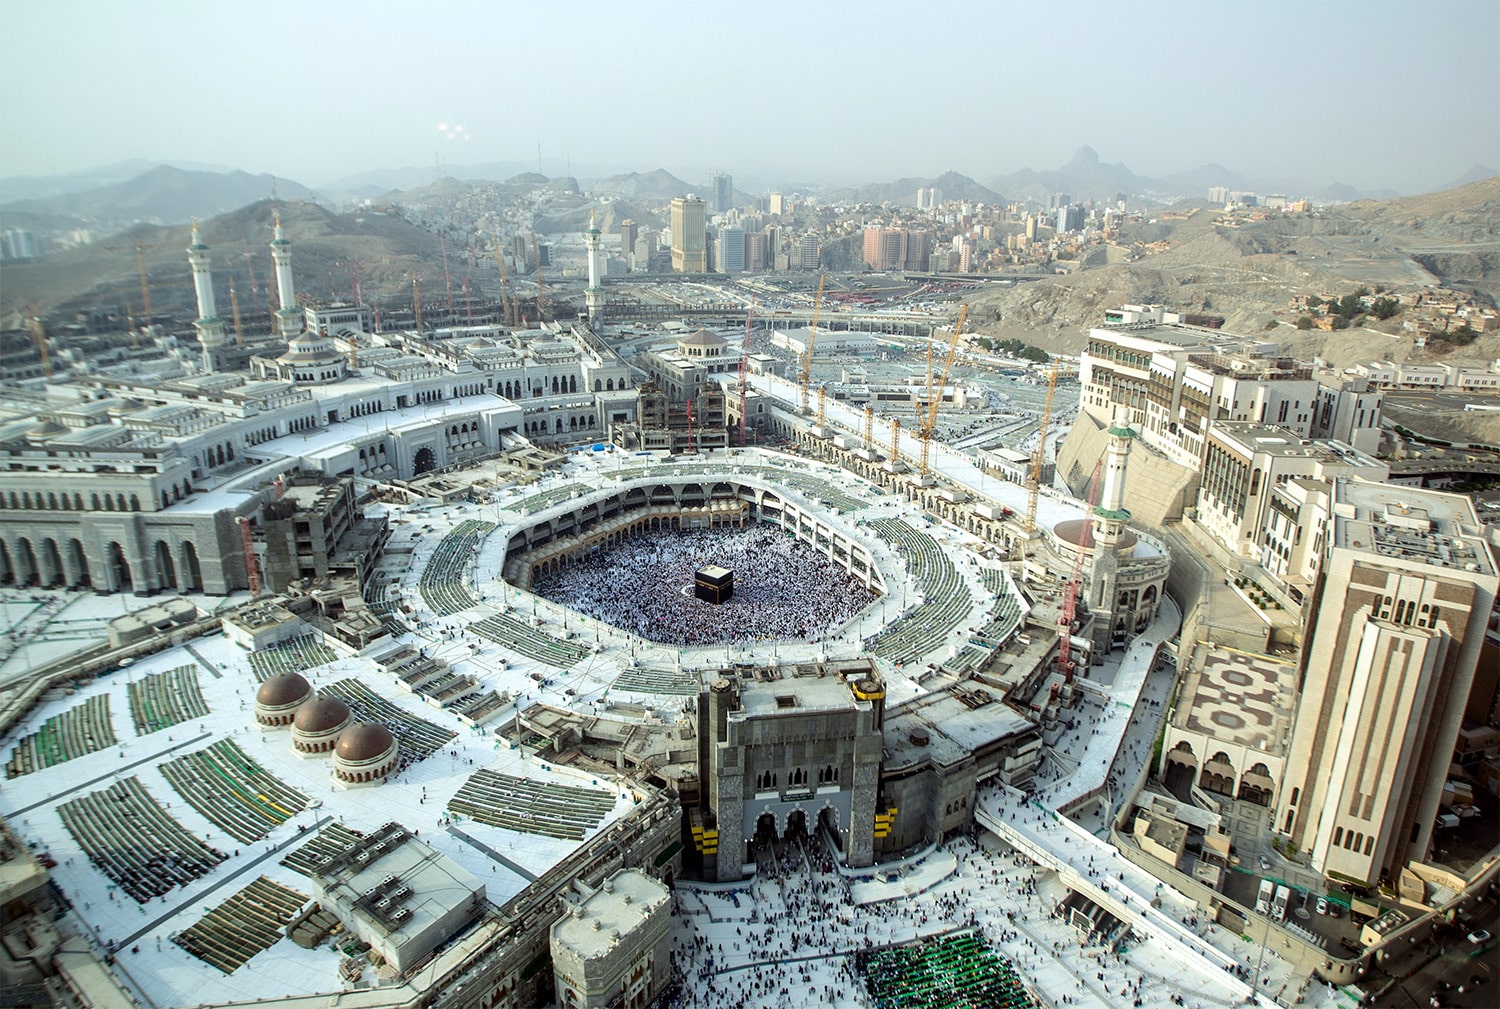 37 interesting facts about Mecca